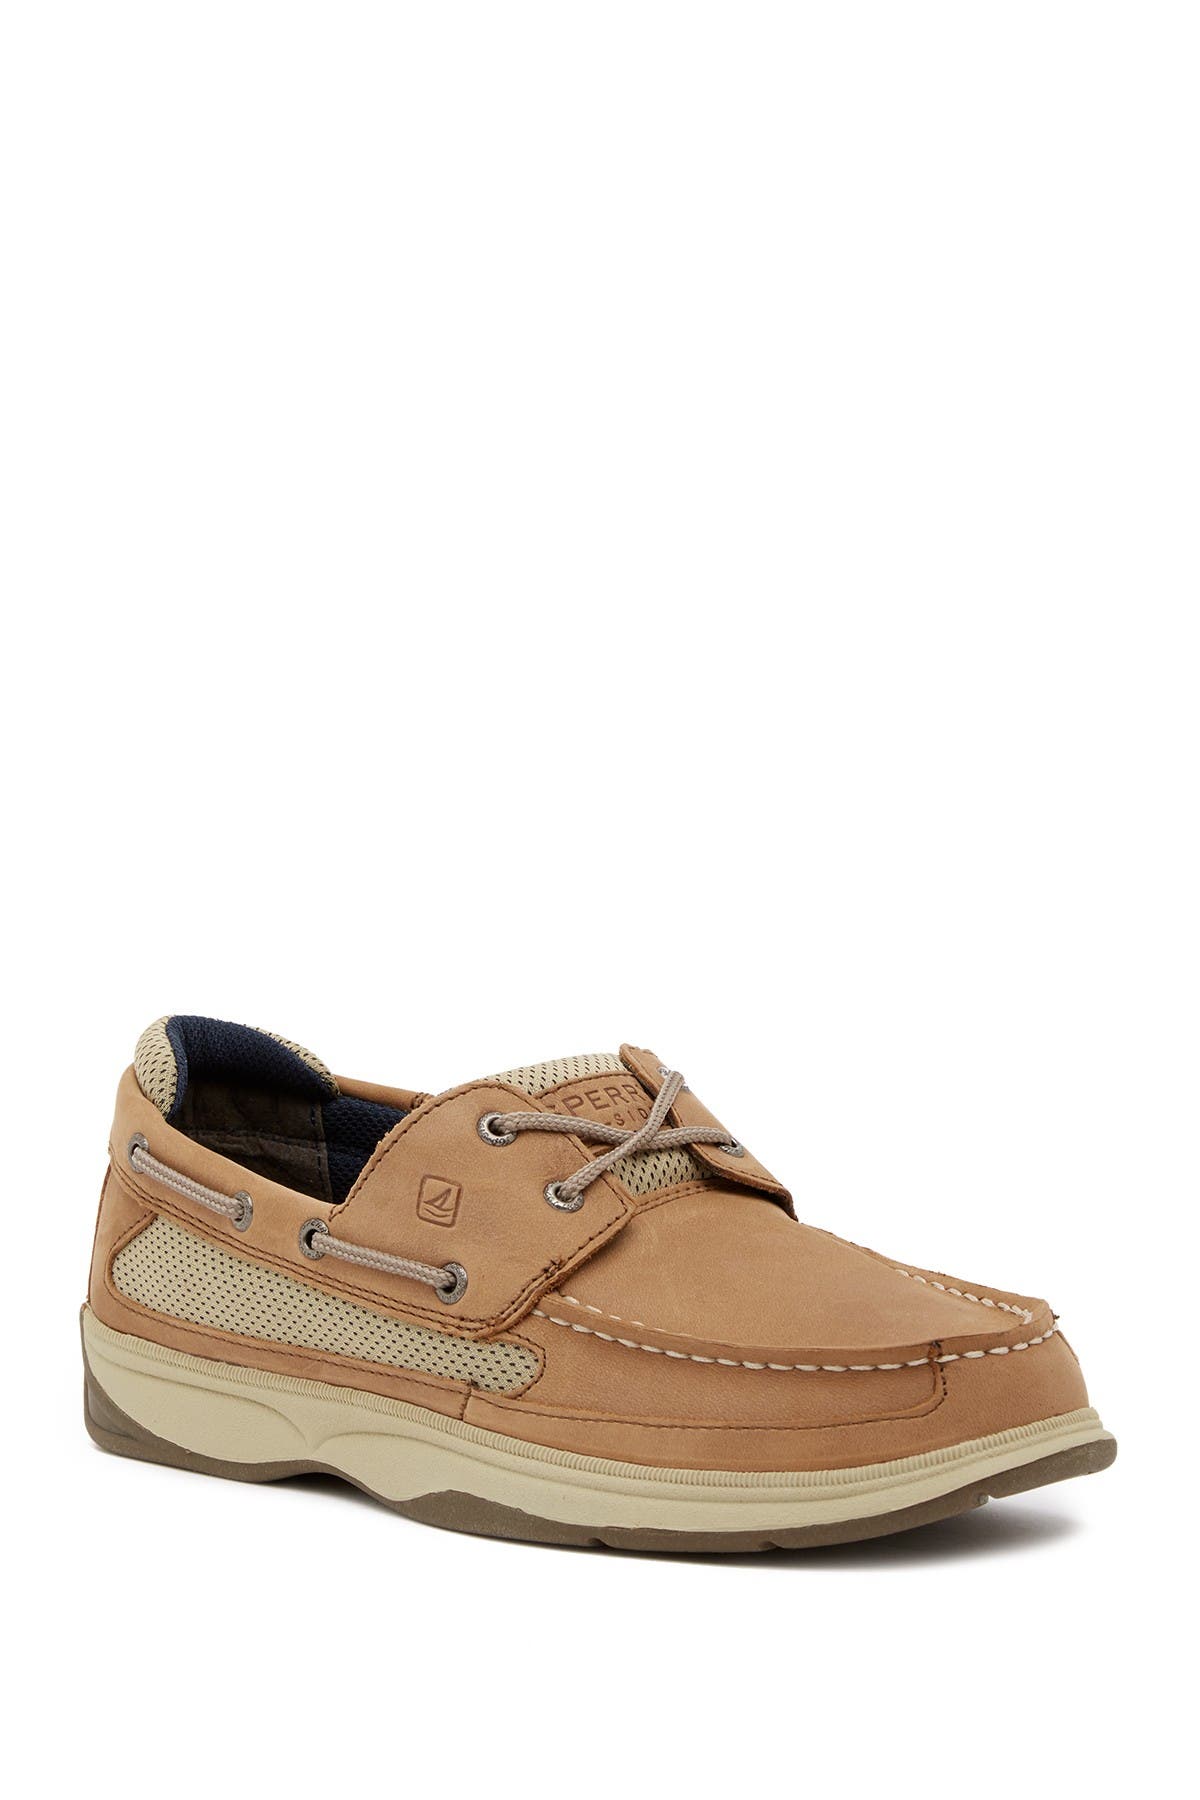 how to clean nubuck sperrys at home